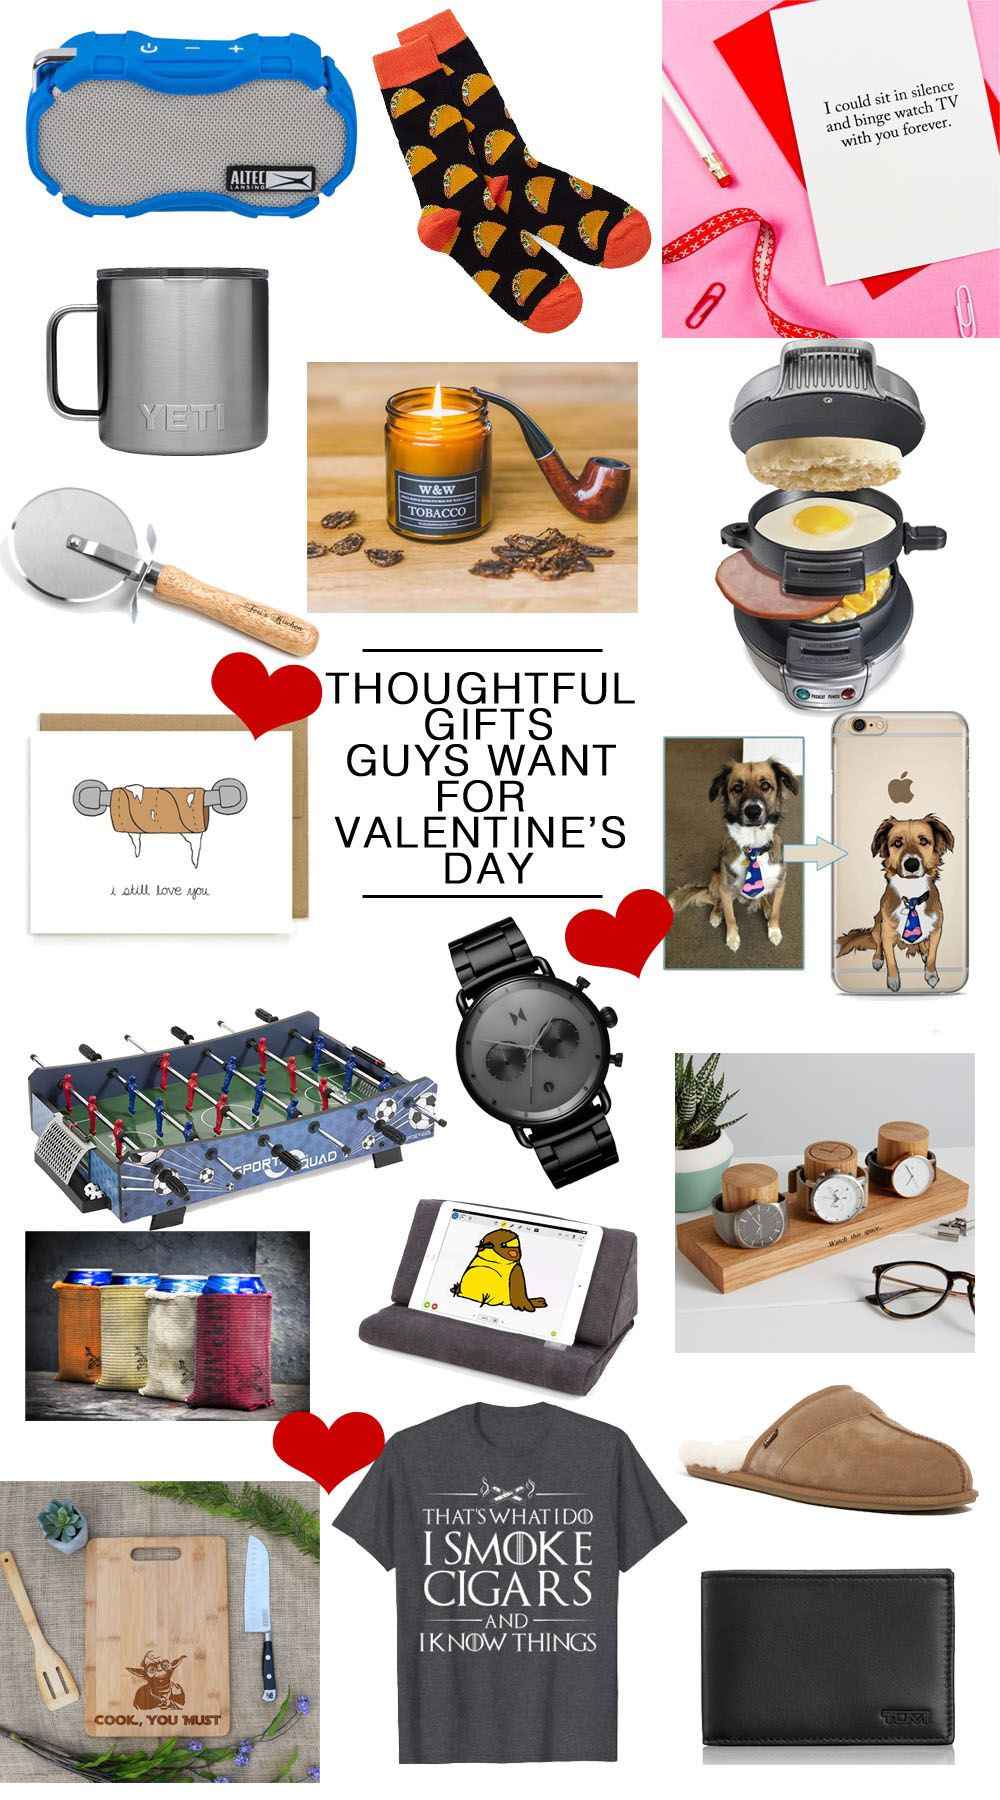 Thoughtful Valentine Gift Ideas
 Valentine’s Day Gifts for Guys